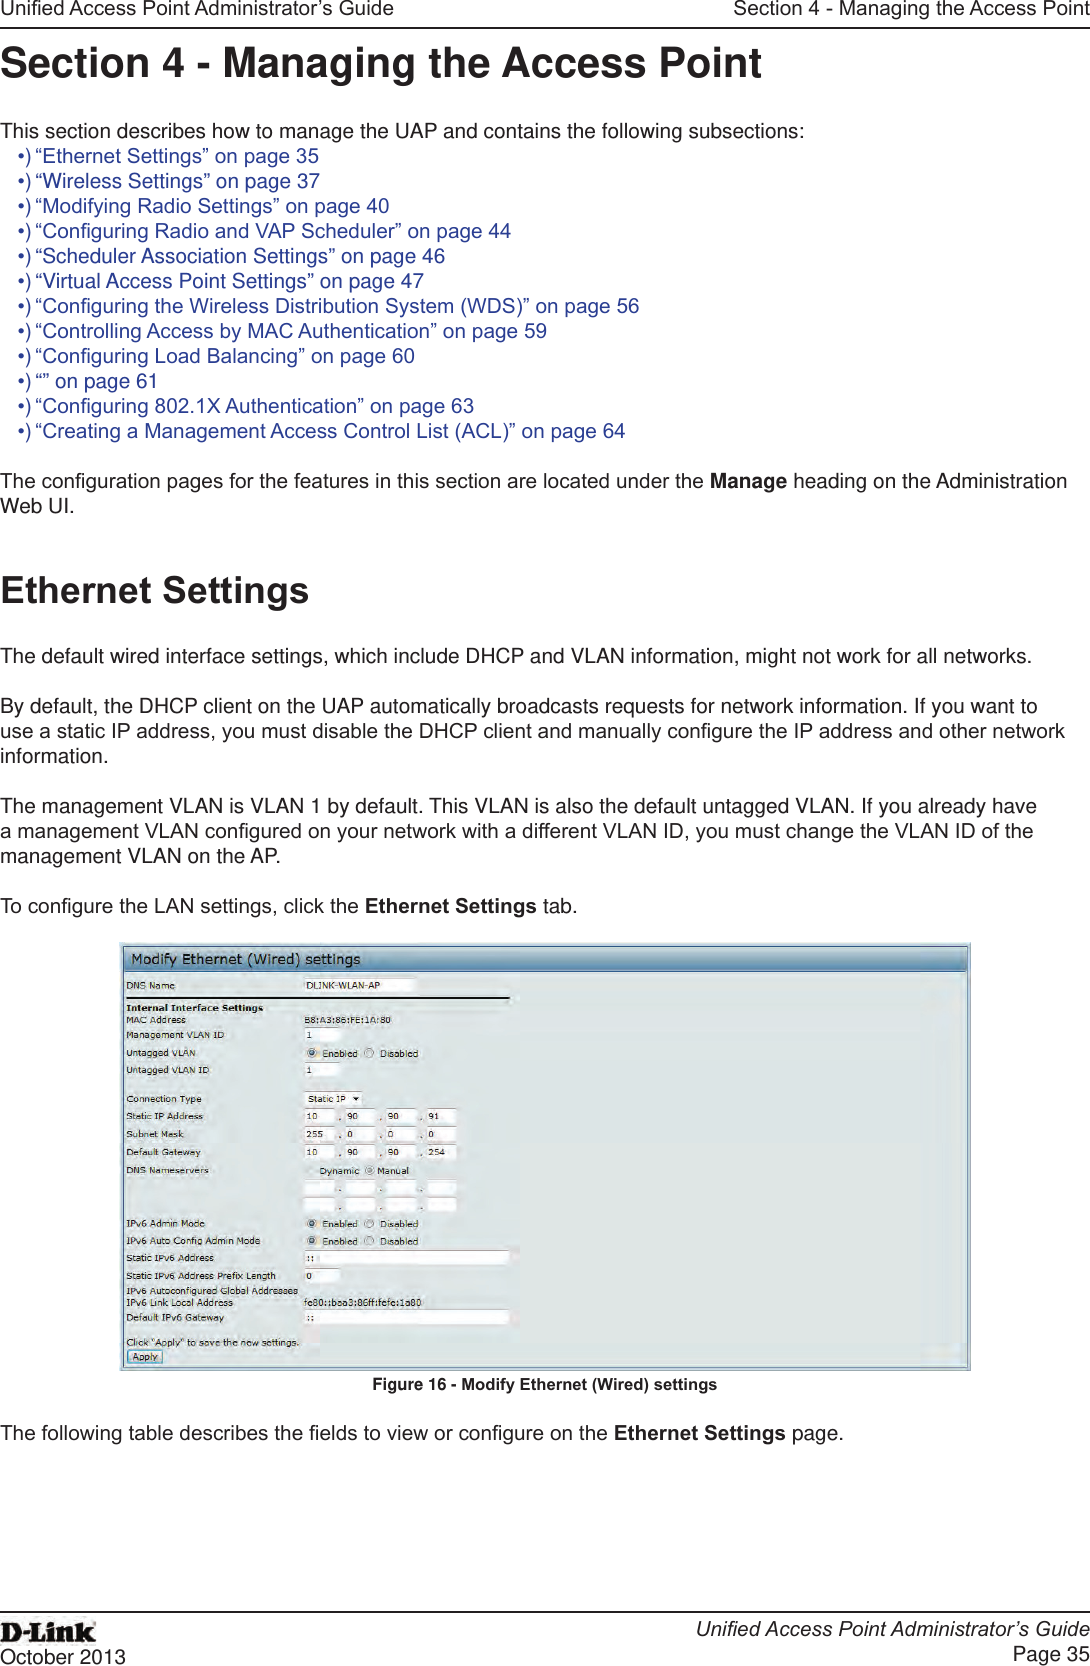 Unied Access Point Administrator’s GuideUnied Access Point Administrator’s GuidePage 35October 2013Section 4 - Managing the Access PointSection 4 - Managing the Access PointThis section describes how to manage the UAP and contains the following subsections:•) “Ethernet Settings” on page 35•) “Wireless Settings” on page 37•) “Modifying Radio Settings” on page 40•) “Conguring Radio and VAP Scheduler” on page 44•) “Scheduler Association Settings” on page 46•) “Virtual Access Point Settings” on page 47•) “Conguring the Wireless Distribution System (WDS)” on page 56•) “Controlling Access by MAC Authentication” on page 59•) “Conguring Load Balancing” on page 60•) “” on page 61•) “Conguring 802.1X Authentication” on page 63•) “Creating a Management Access Control List (ACL)” on page 64The conguration pages for the features in this section are located under the Manage heading on the Administration Web UI.Ethernet SettingsThe default wired interface settings, which include DHCP and VLAN information, might not work for all networks. By default, the DHCP client on the UAP automatically broadcasts requests for network information. If you want to use a static IP address, you must disable the DHCP client and manually congure the IP address and other network information.The management VLAN is VLAN 1 by default. This VLAN is also the default untagged VLAN. If you already have a management VLAN congured on your network with a different VLAN ID, you must change the VLAN ID of the management VLAN on the AP.To congure the LAN settings, click the Ethernet Settings tab.Figure 16 - Modify Ethernet (Wired) settingsThe following table describes the elds to view or congure on the Ethernet Settings page.